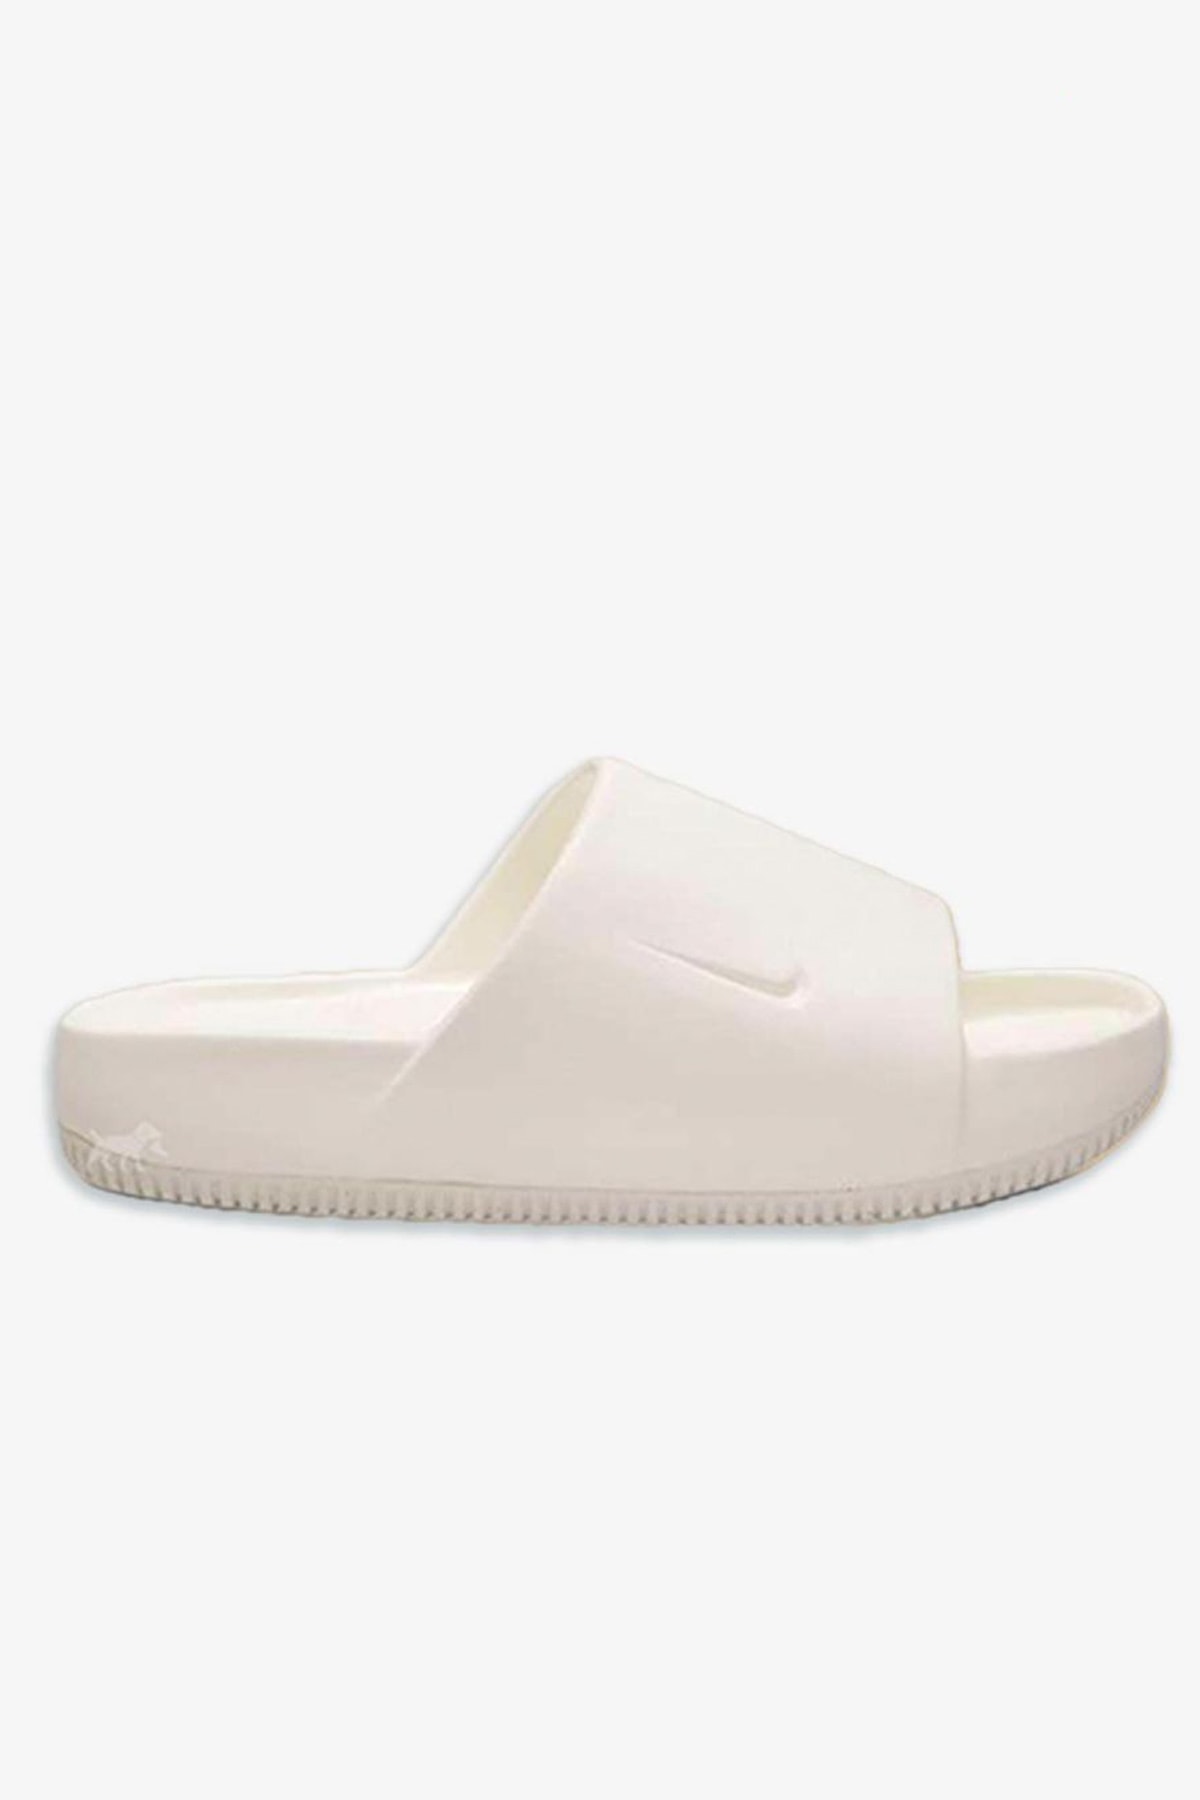 Nike Introduces Calm Slides Sandals Release Info